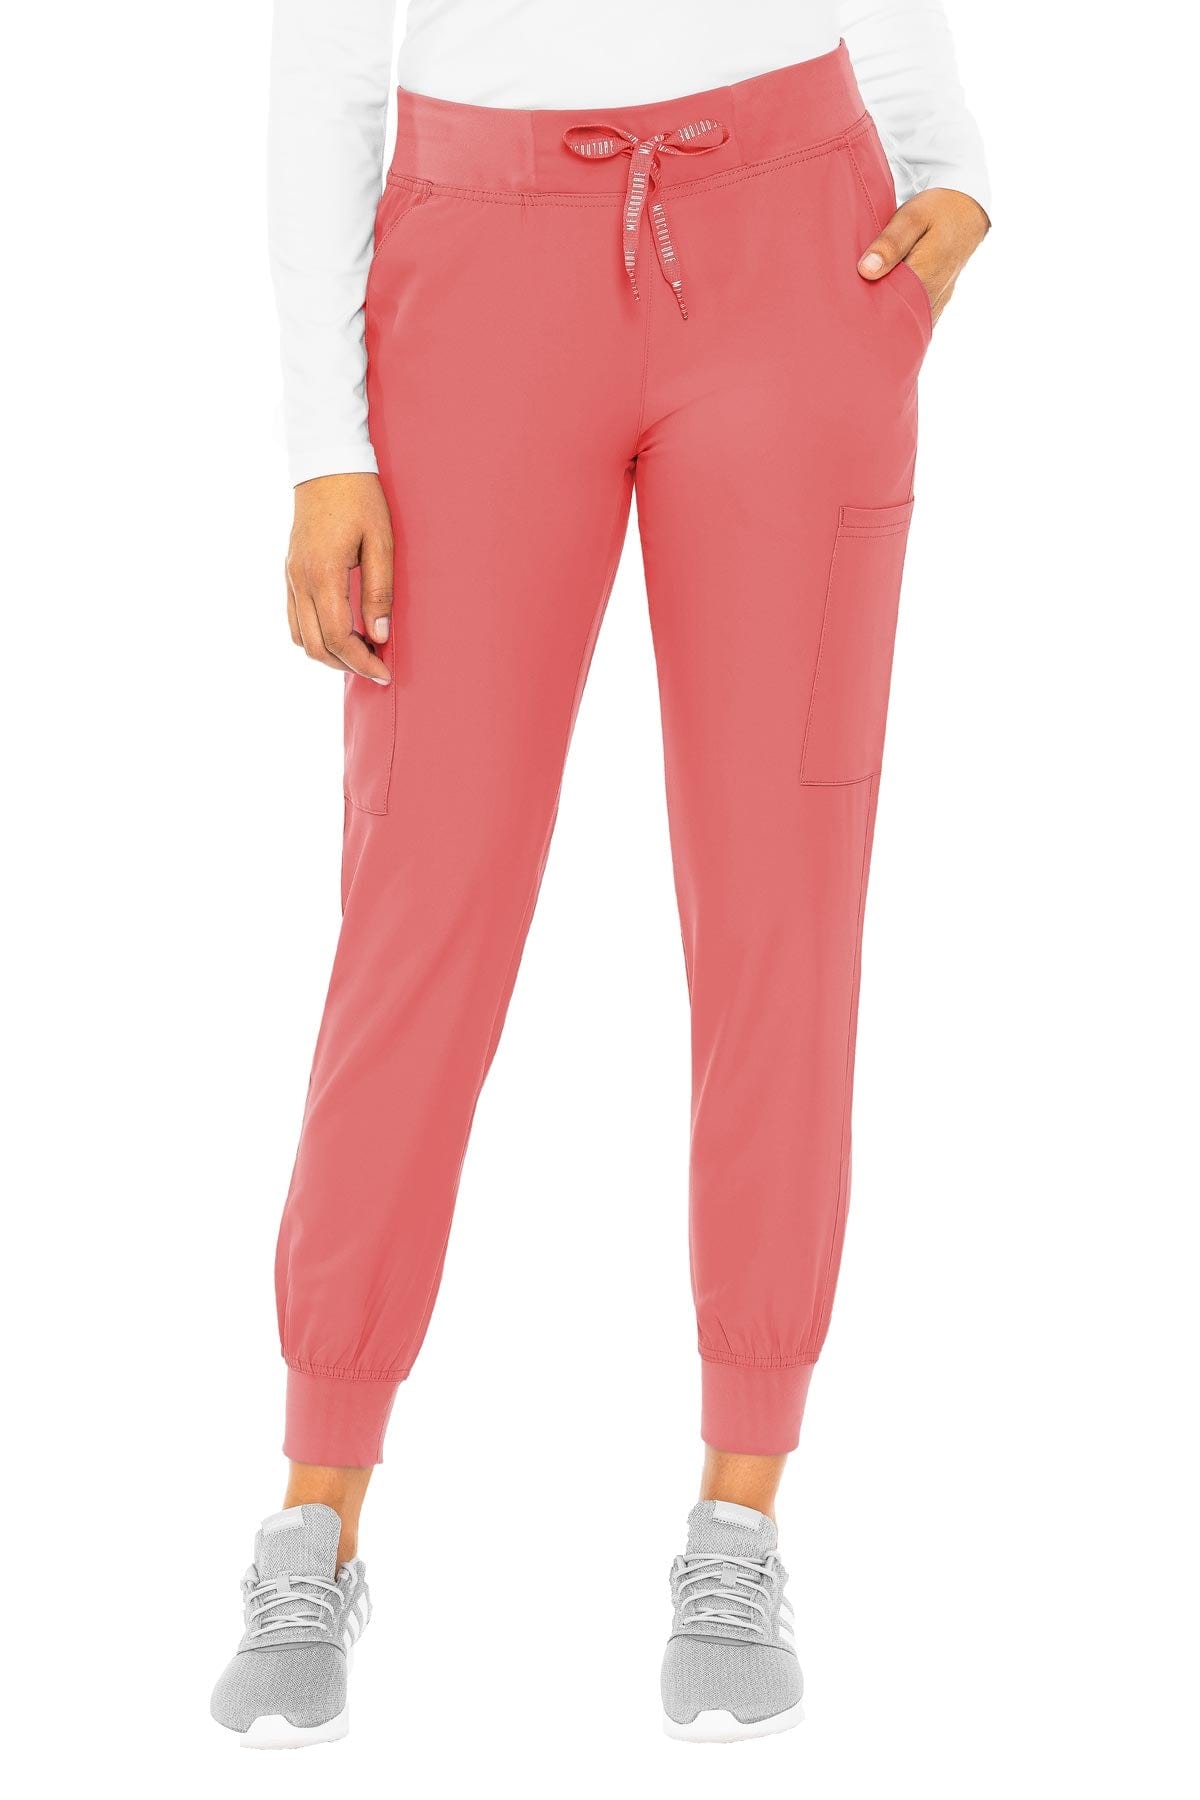 MedCouture Insight 2711 Jogger Pant